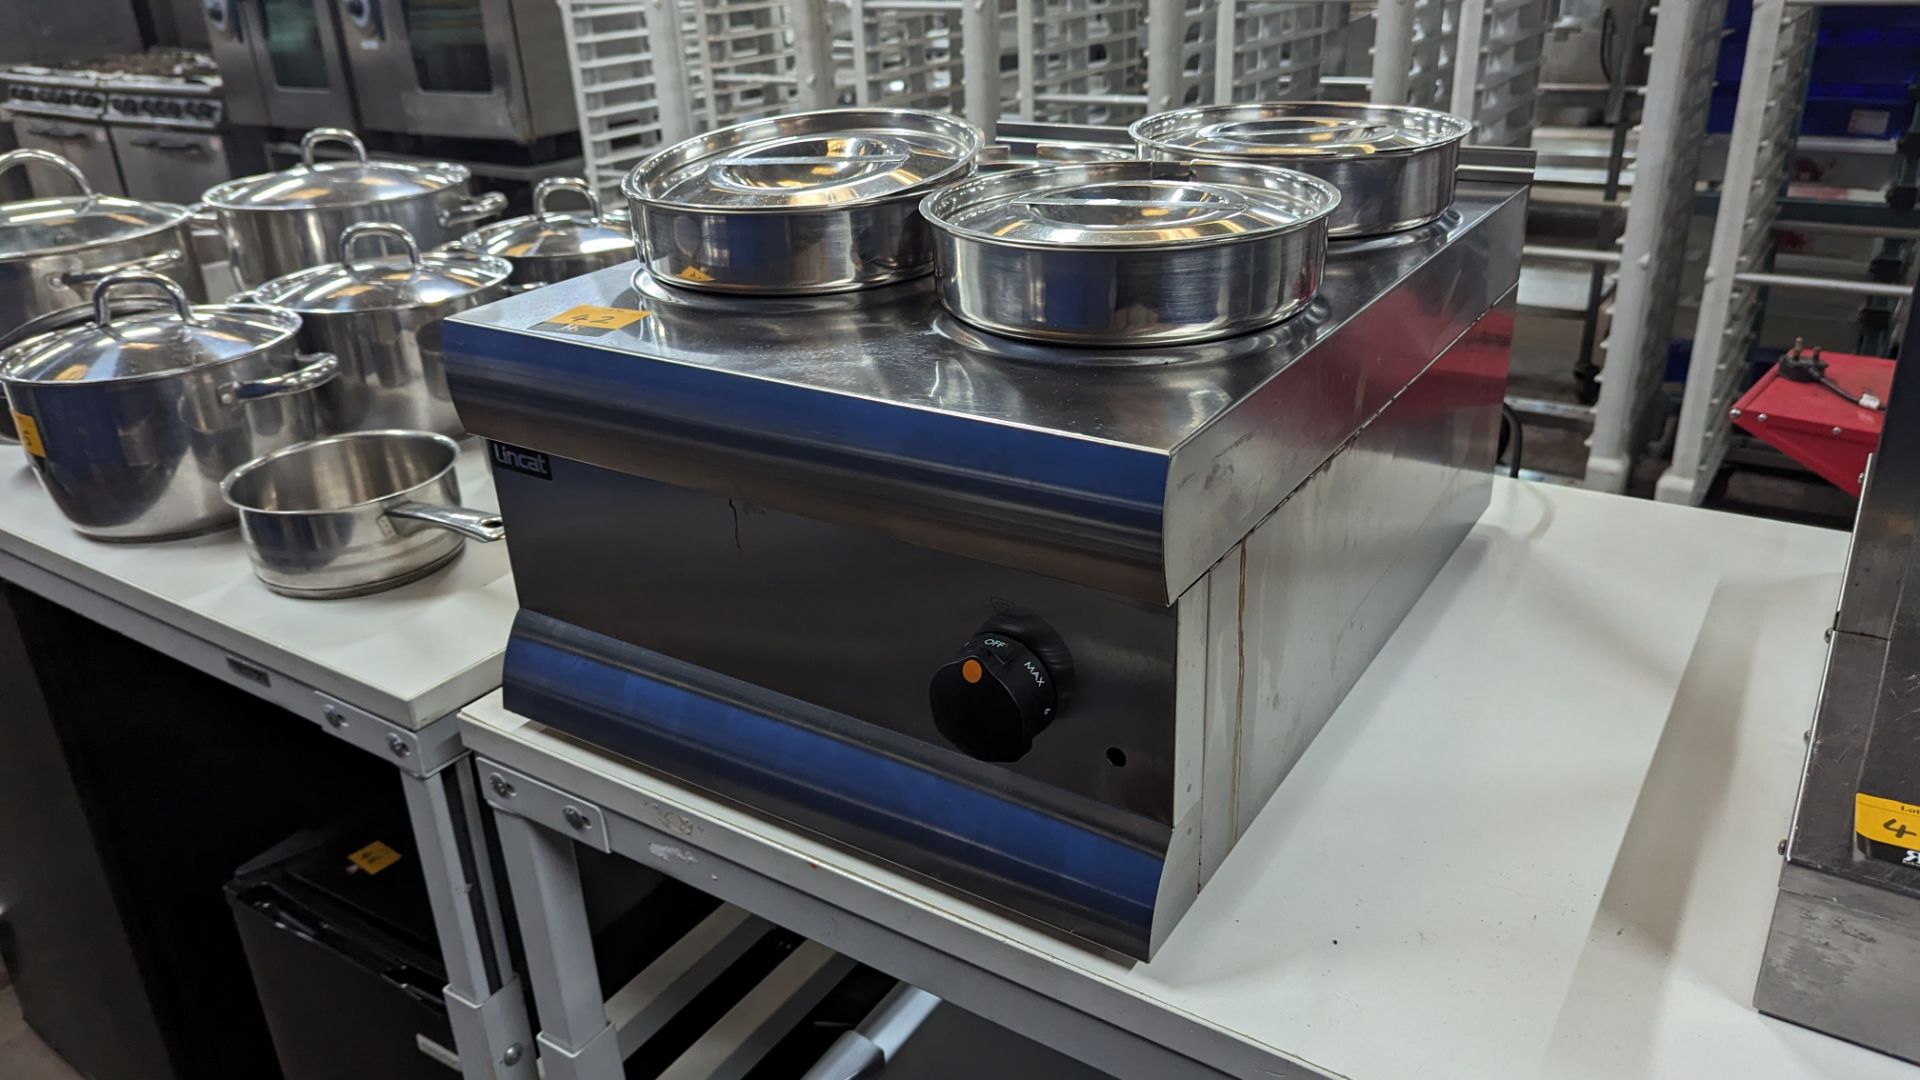 Lincat stainless steel benchtop 4 compartment bain marie including 3 removable circular pots & 4 lid